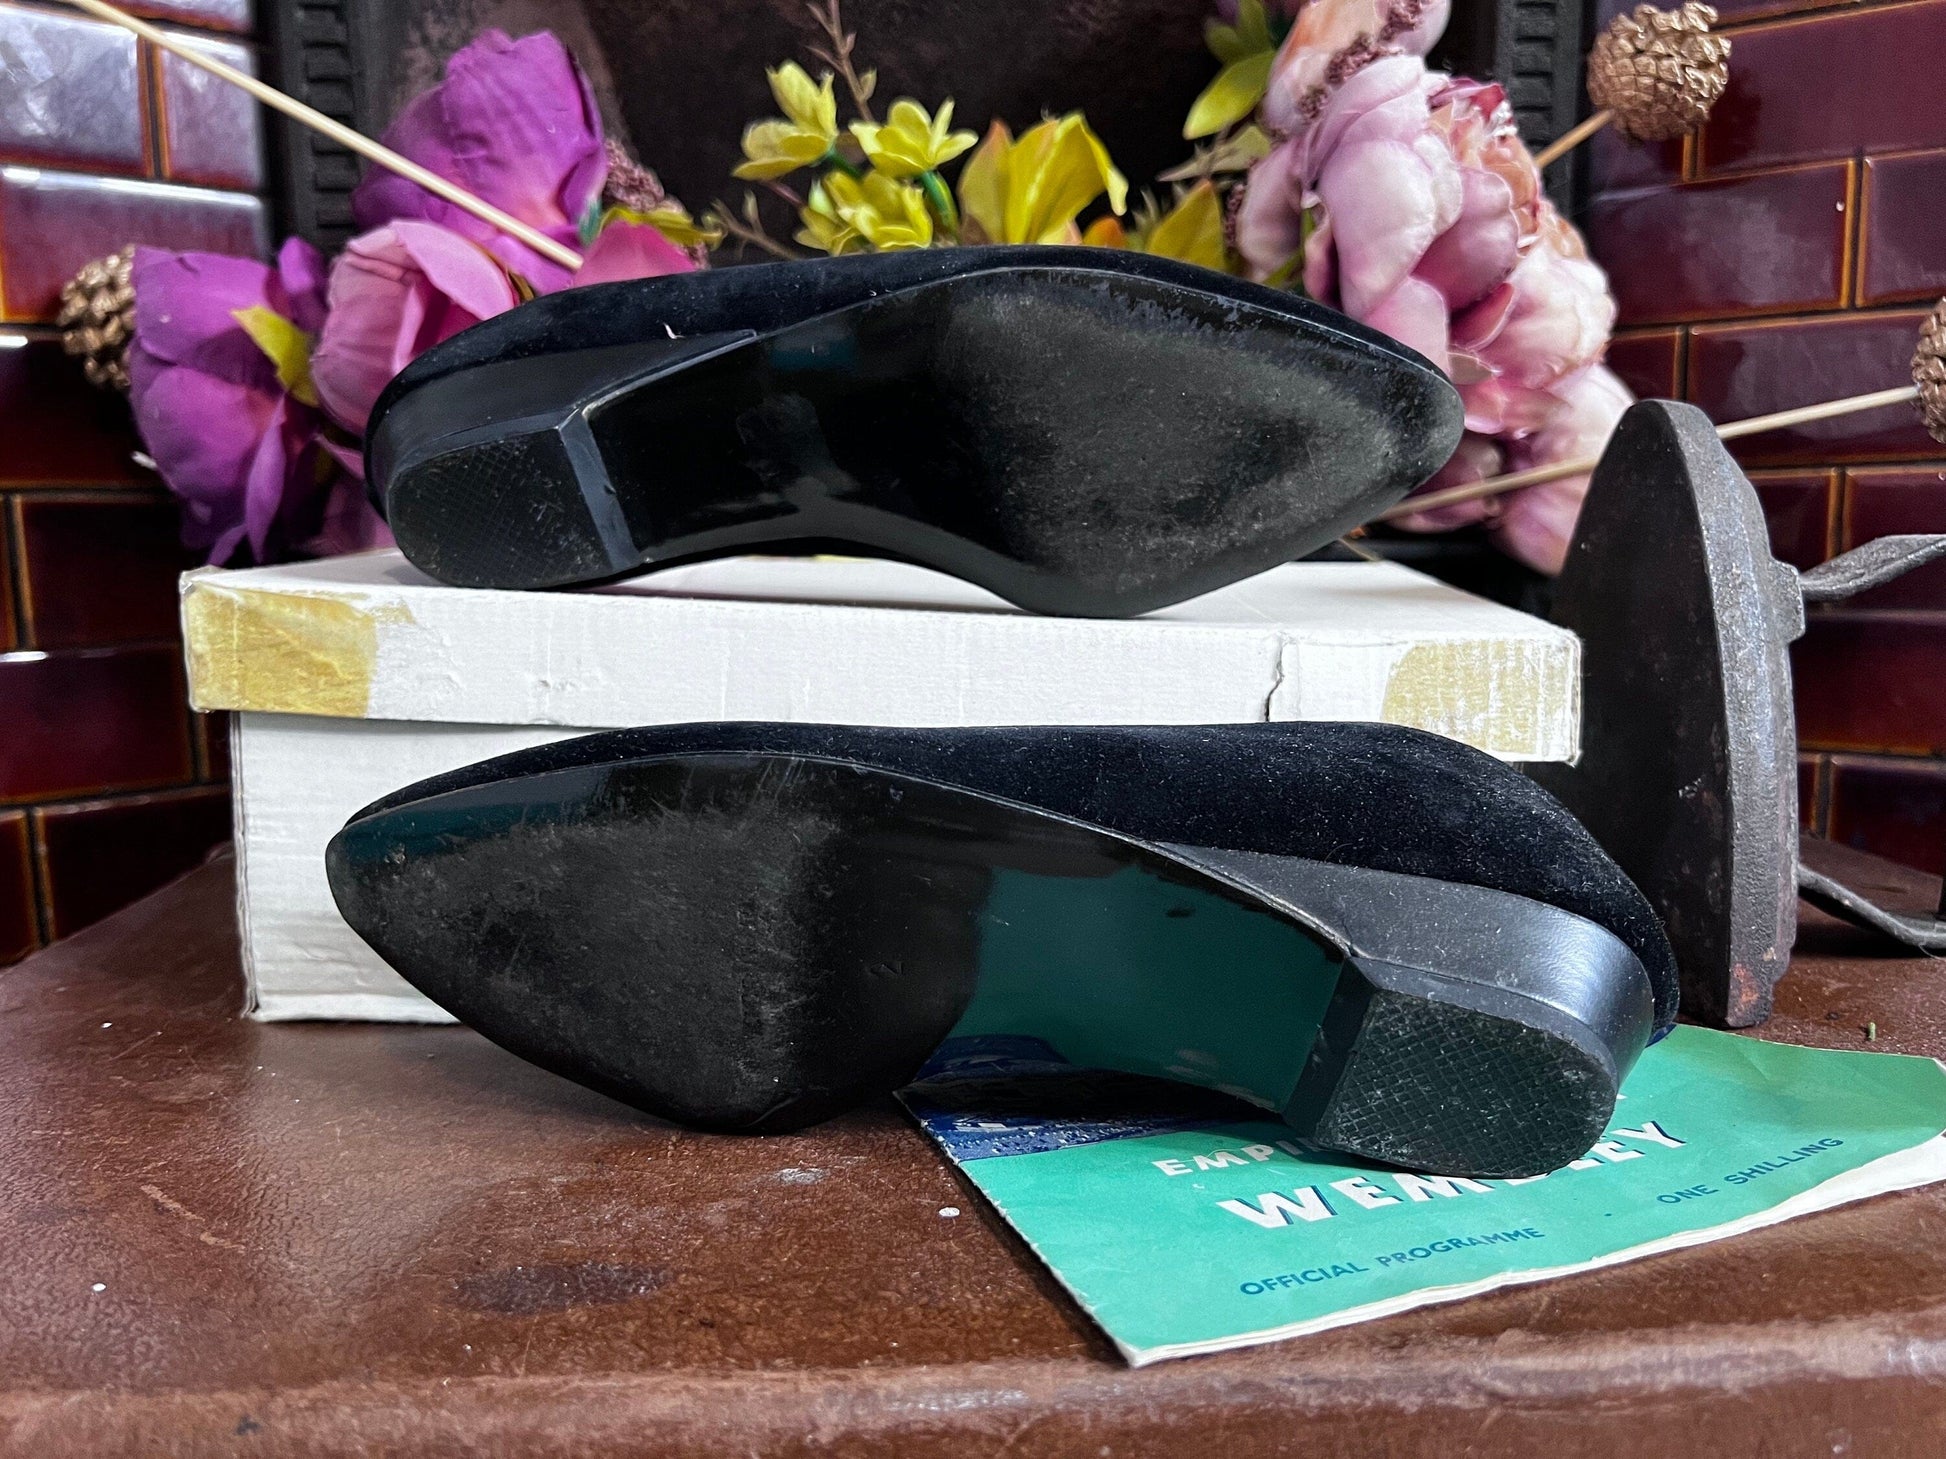 70s Black Shoes leather Pointed Shoes Black velvet, Vintage flats, Vintage Shoes, 70s Shoes, vintage shoes & box UK2 Vintage Italian shoes,